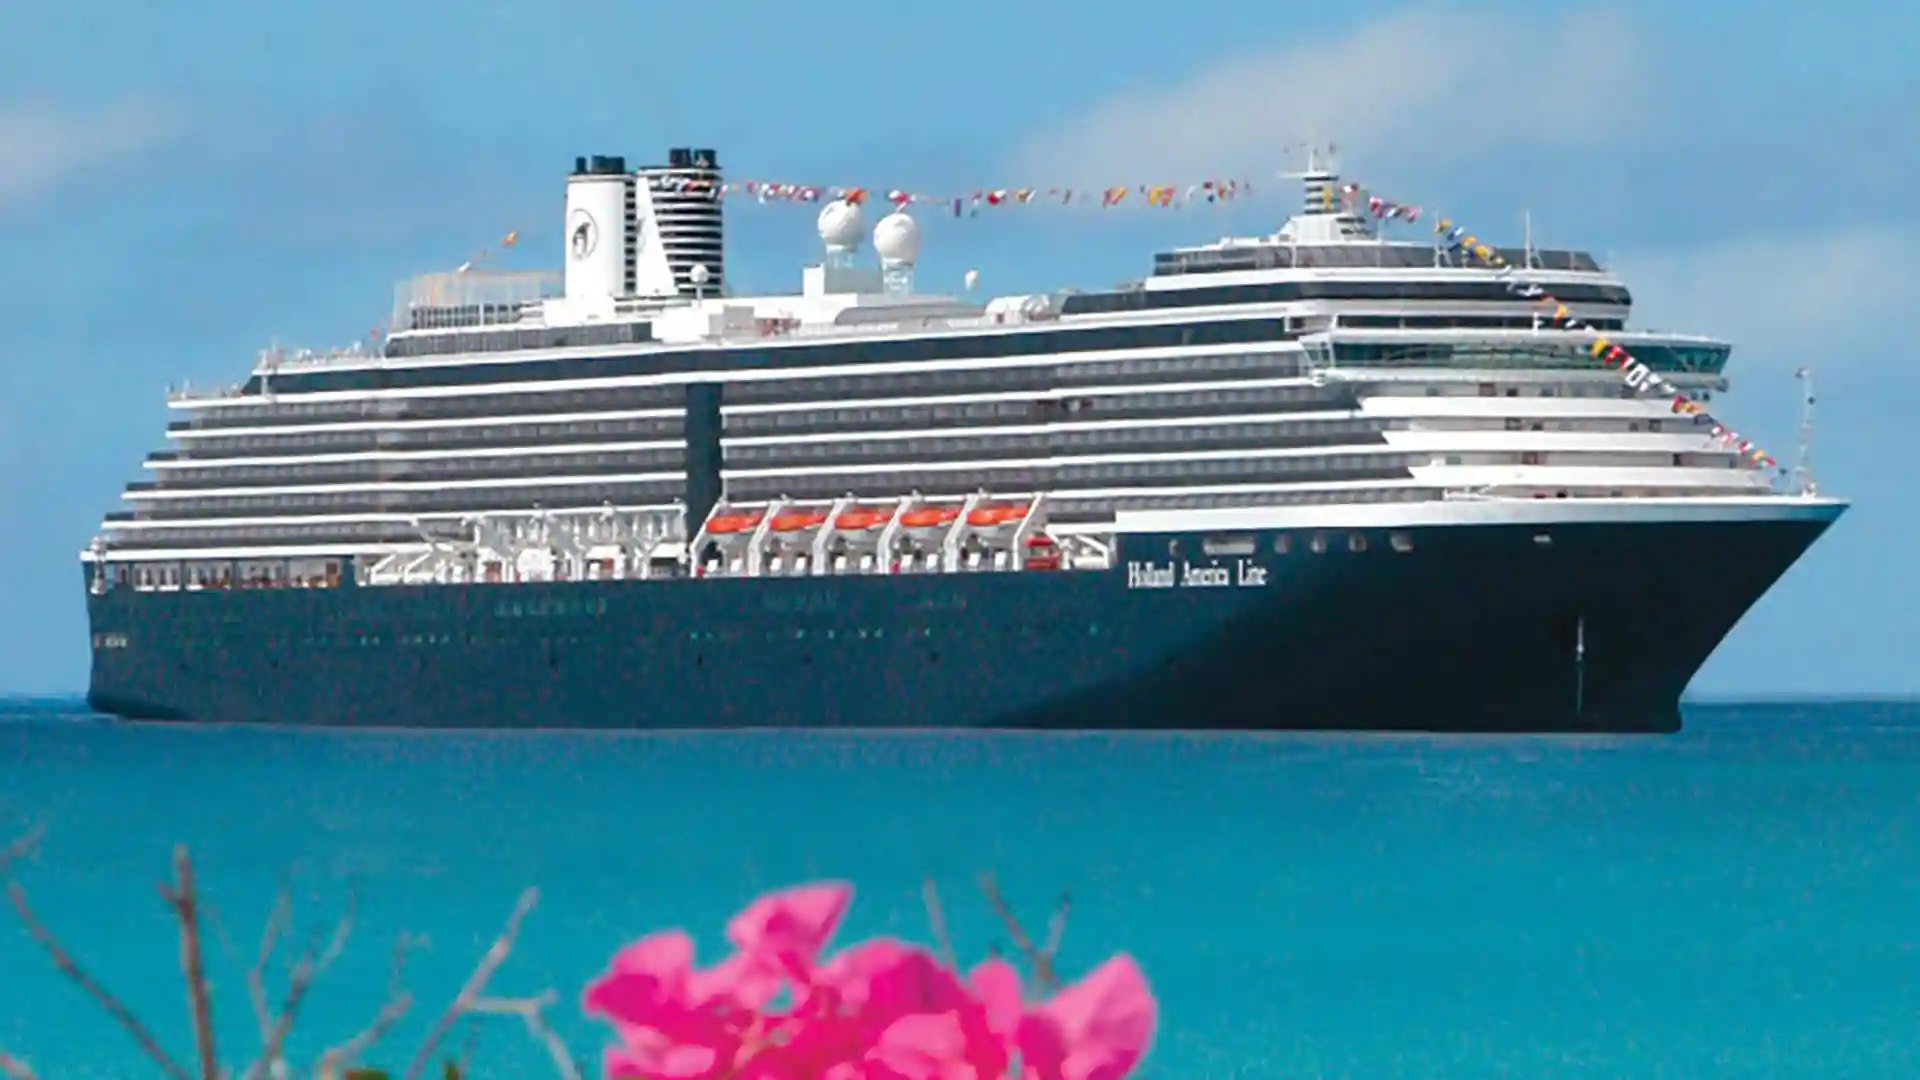 View of Holland America Line cruise ship in Caribbean.